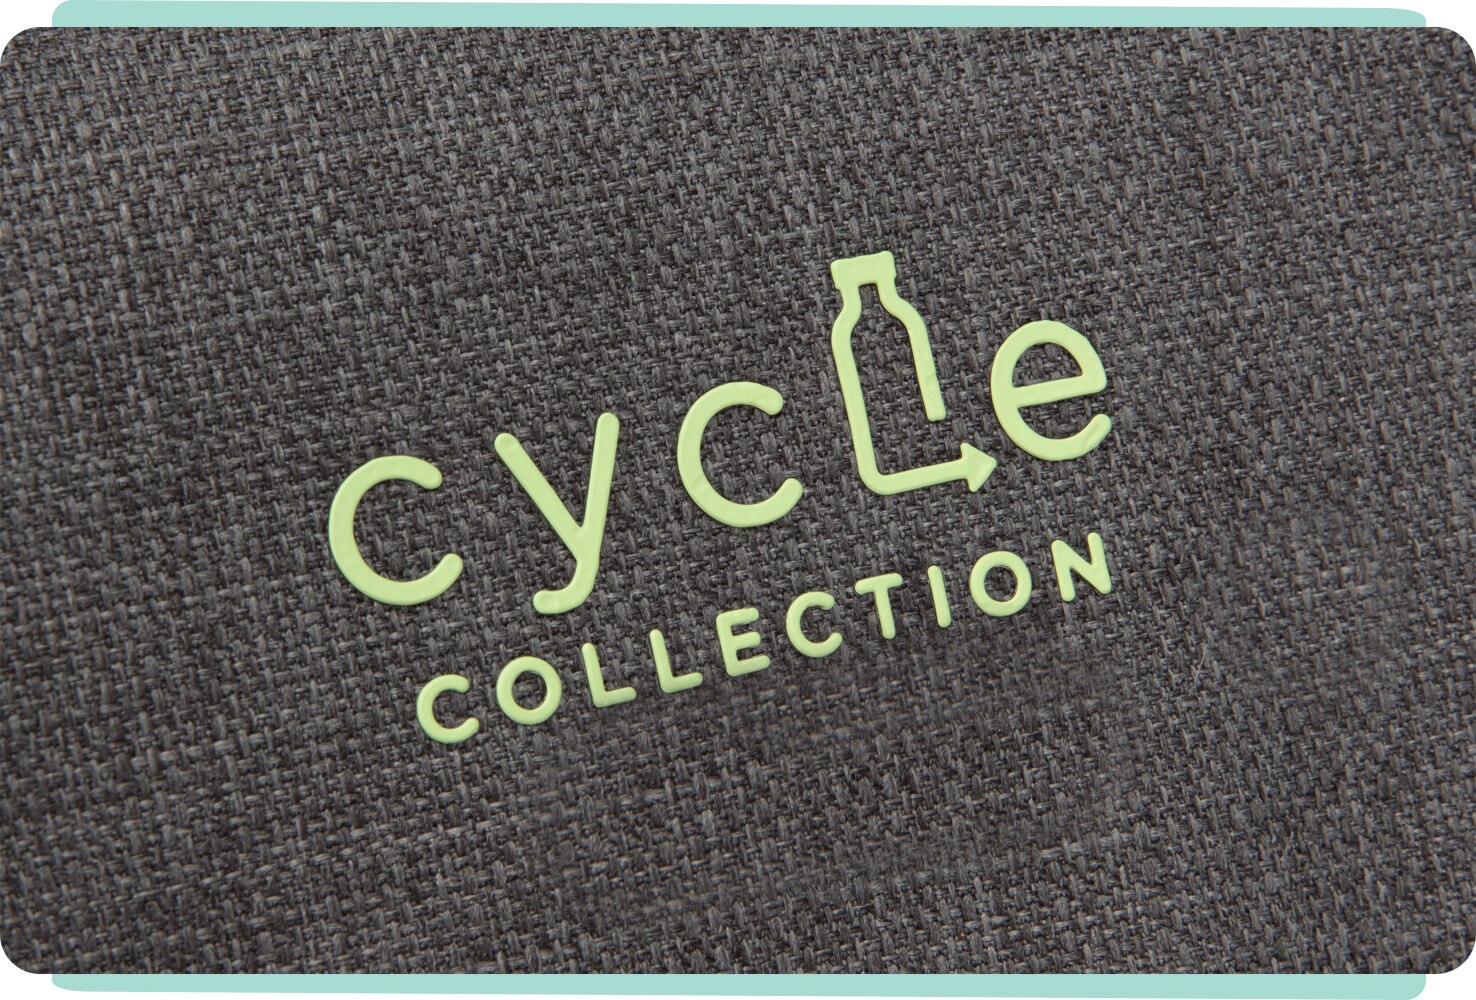  Closeup on a green Cycle Collection logo on dark gray fabric.